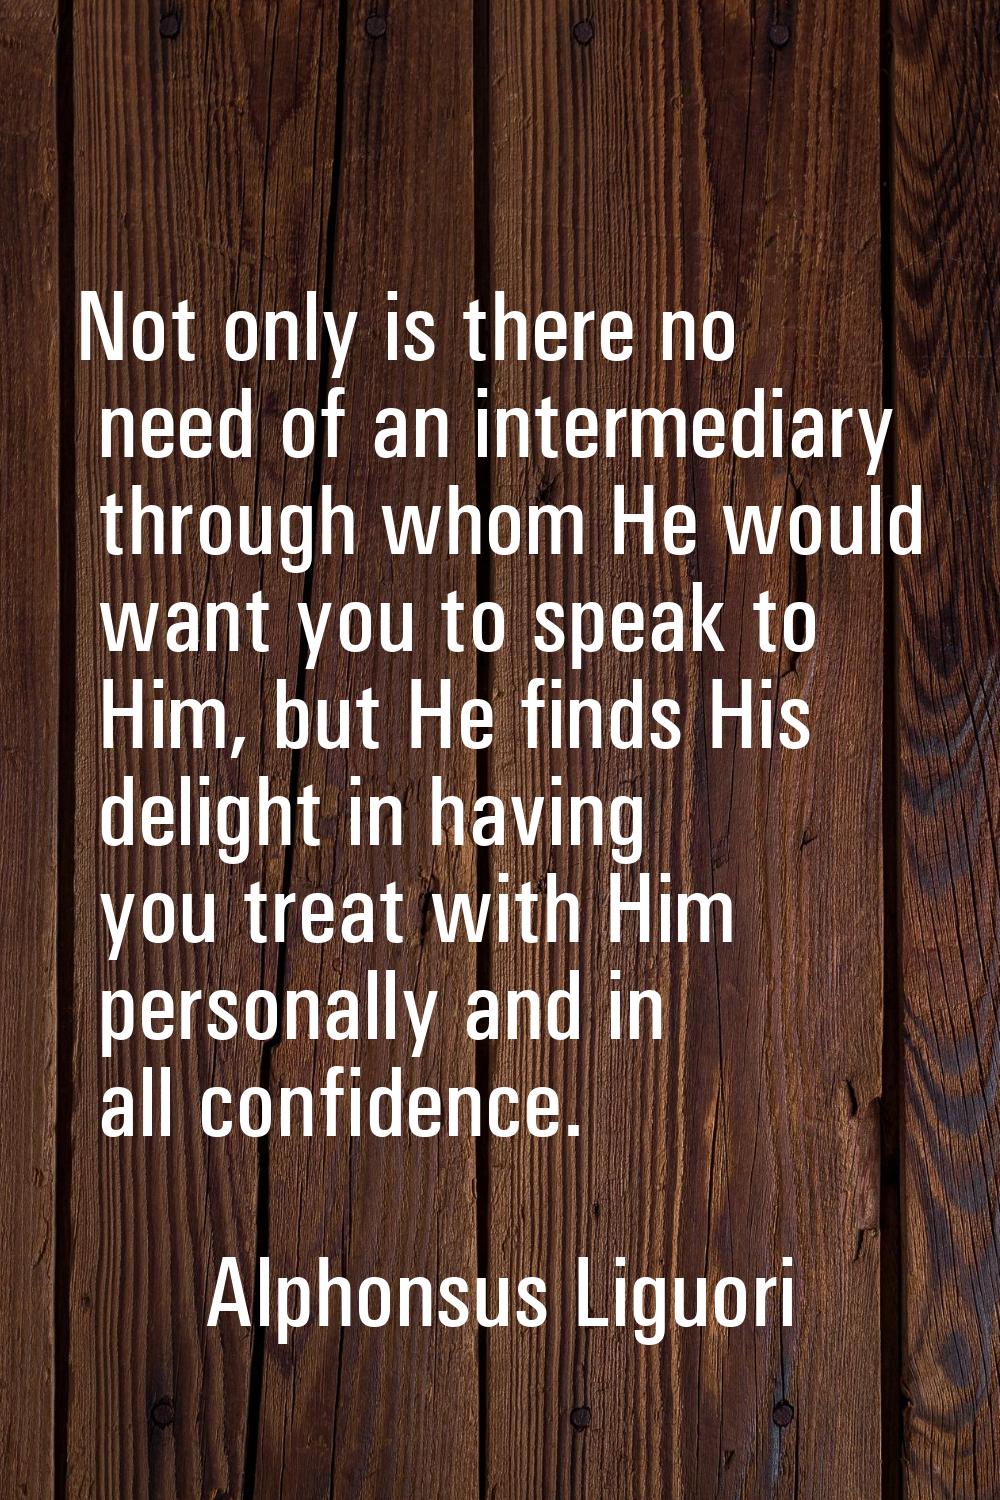 Not only is there no need of an intermediary through whom He would want you to speak to Him, but He